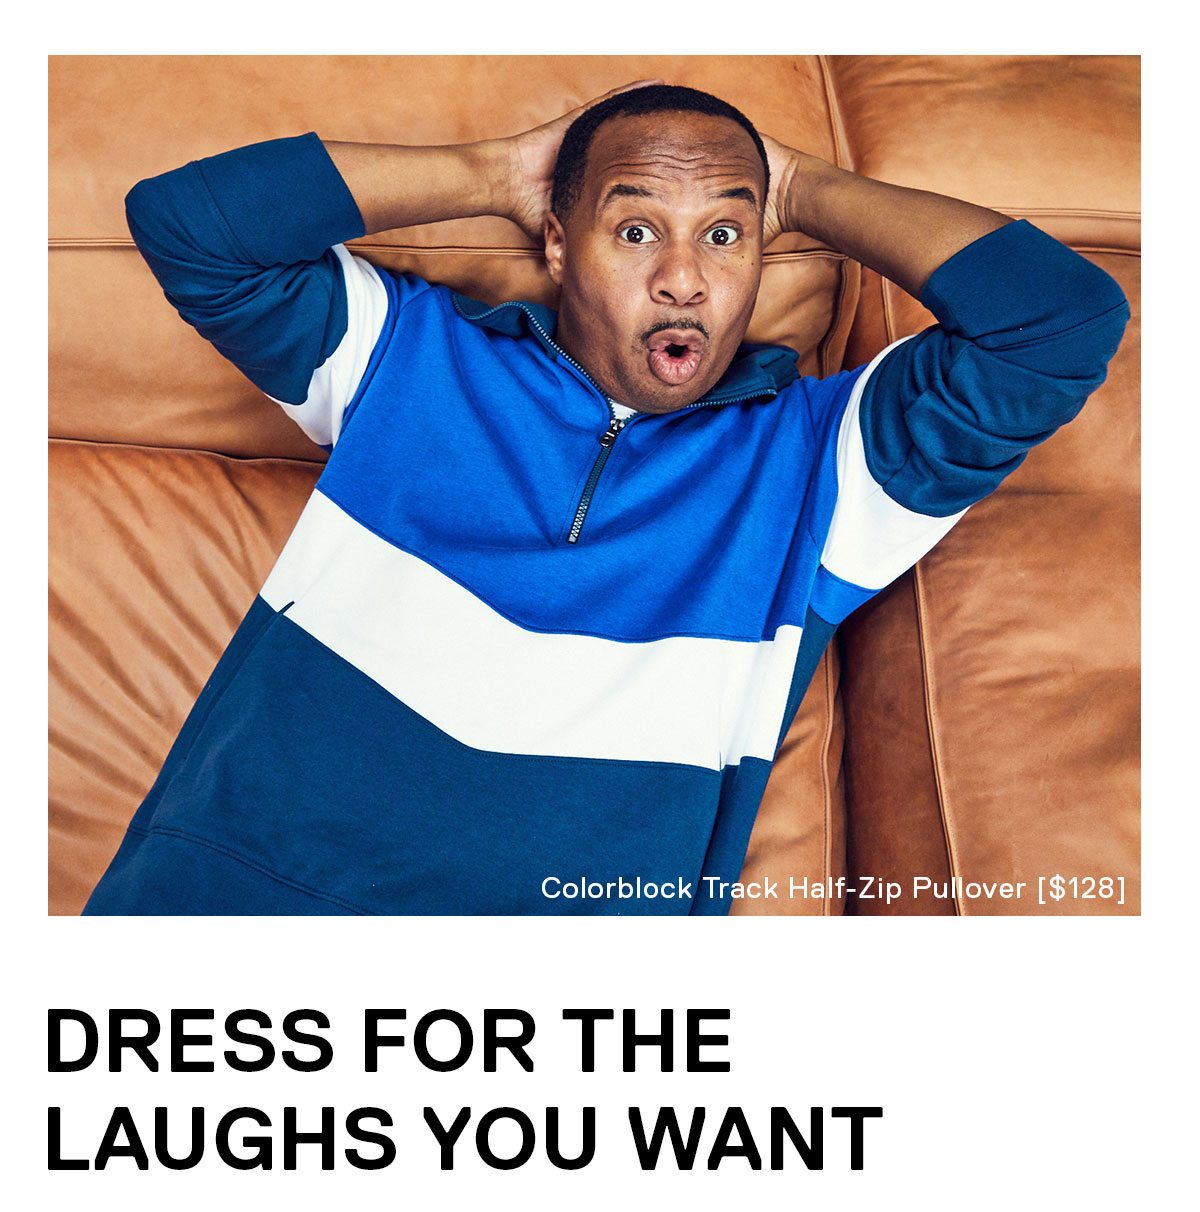 Roy Wood Jr. Dresses for the Laughs He Wants